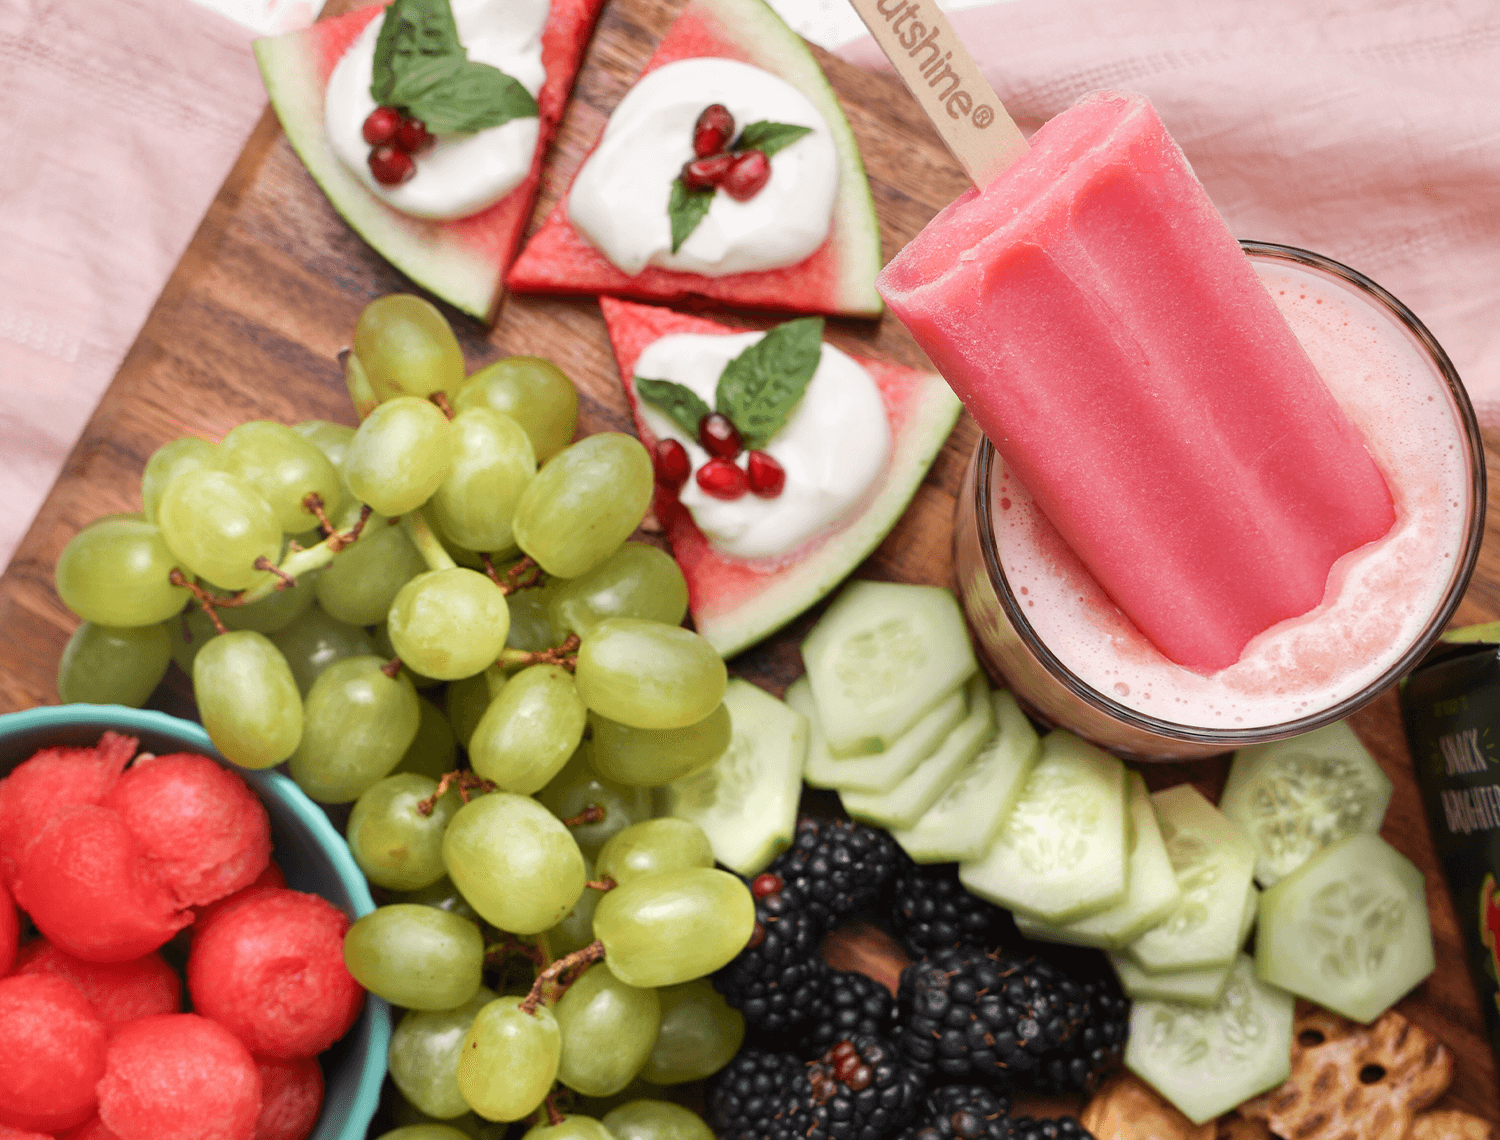 Outshine watermelon bar with a smoothie and other snacks